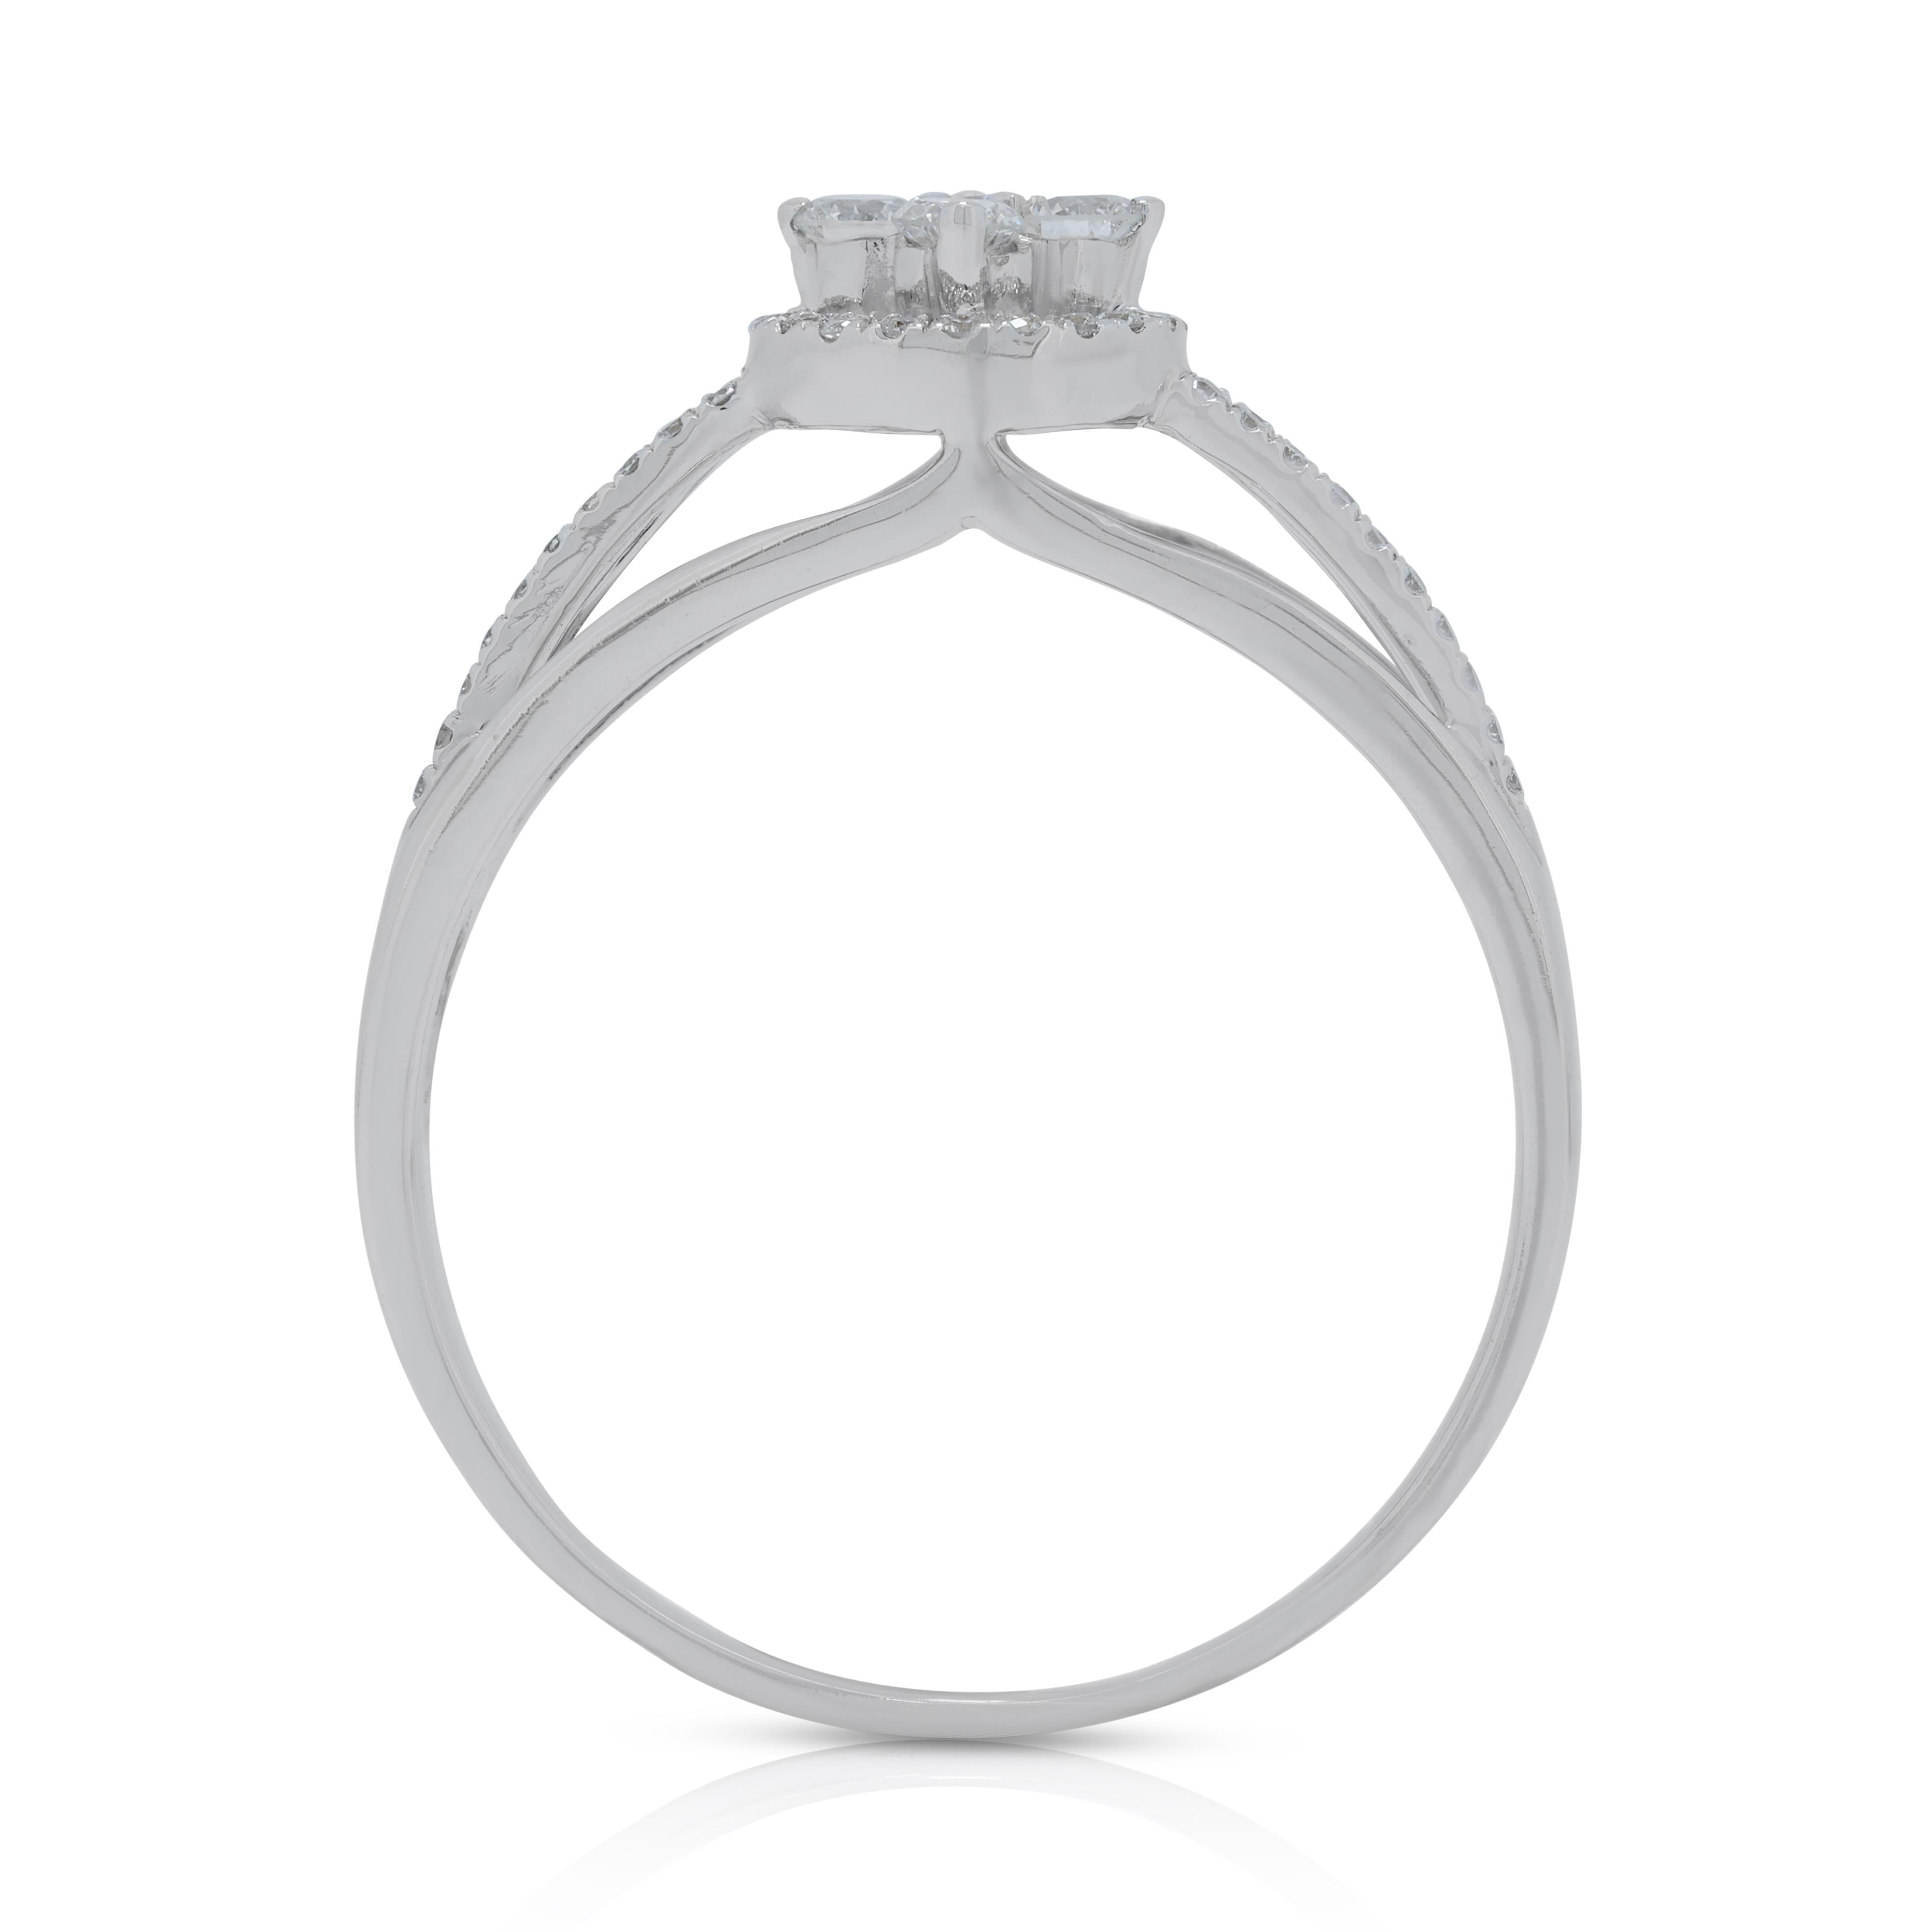 Dazzling 0.495ct Diamonds Cluster Ring in 18K White Gold For Sale 2